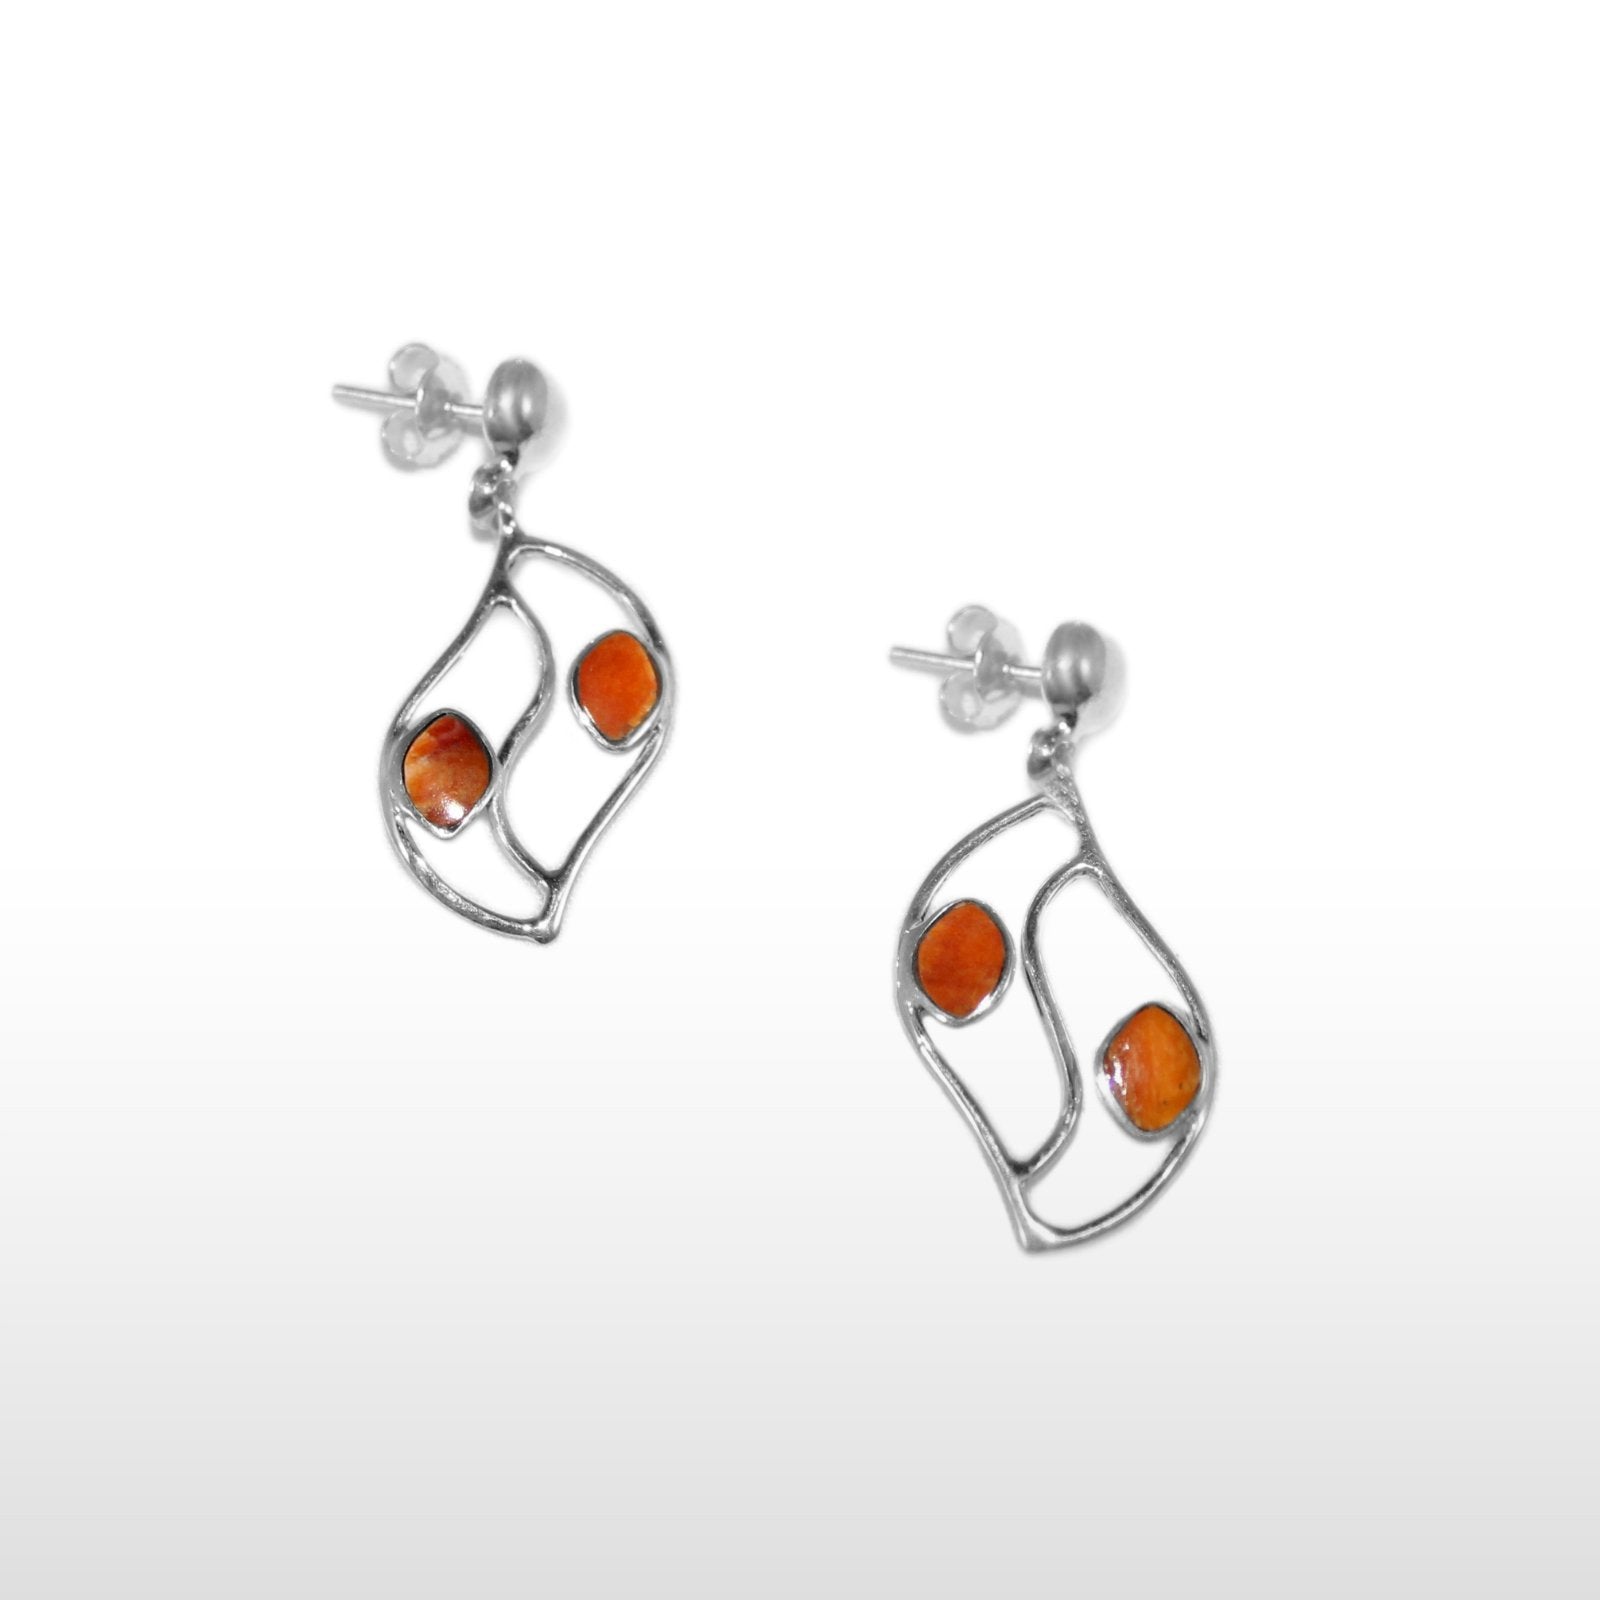 Orange Spiny Oyster & Sterling Silver Leaves Pendant & Earrings Set - Qinti - The Peruvian Shop